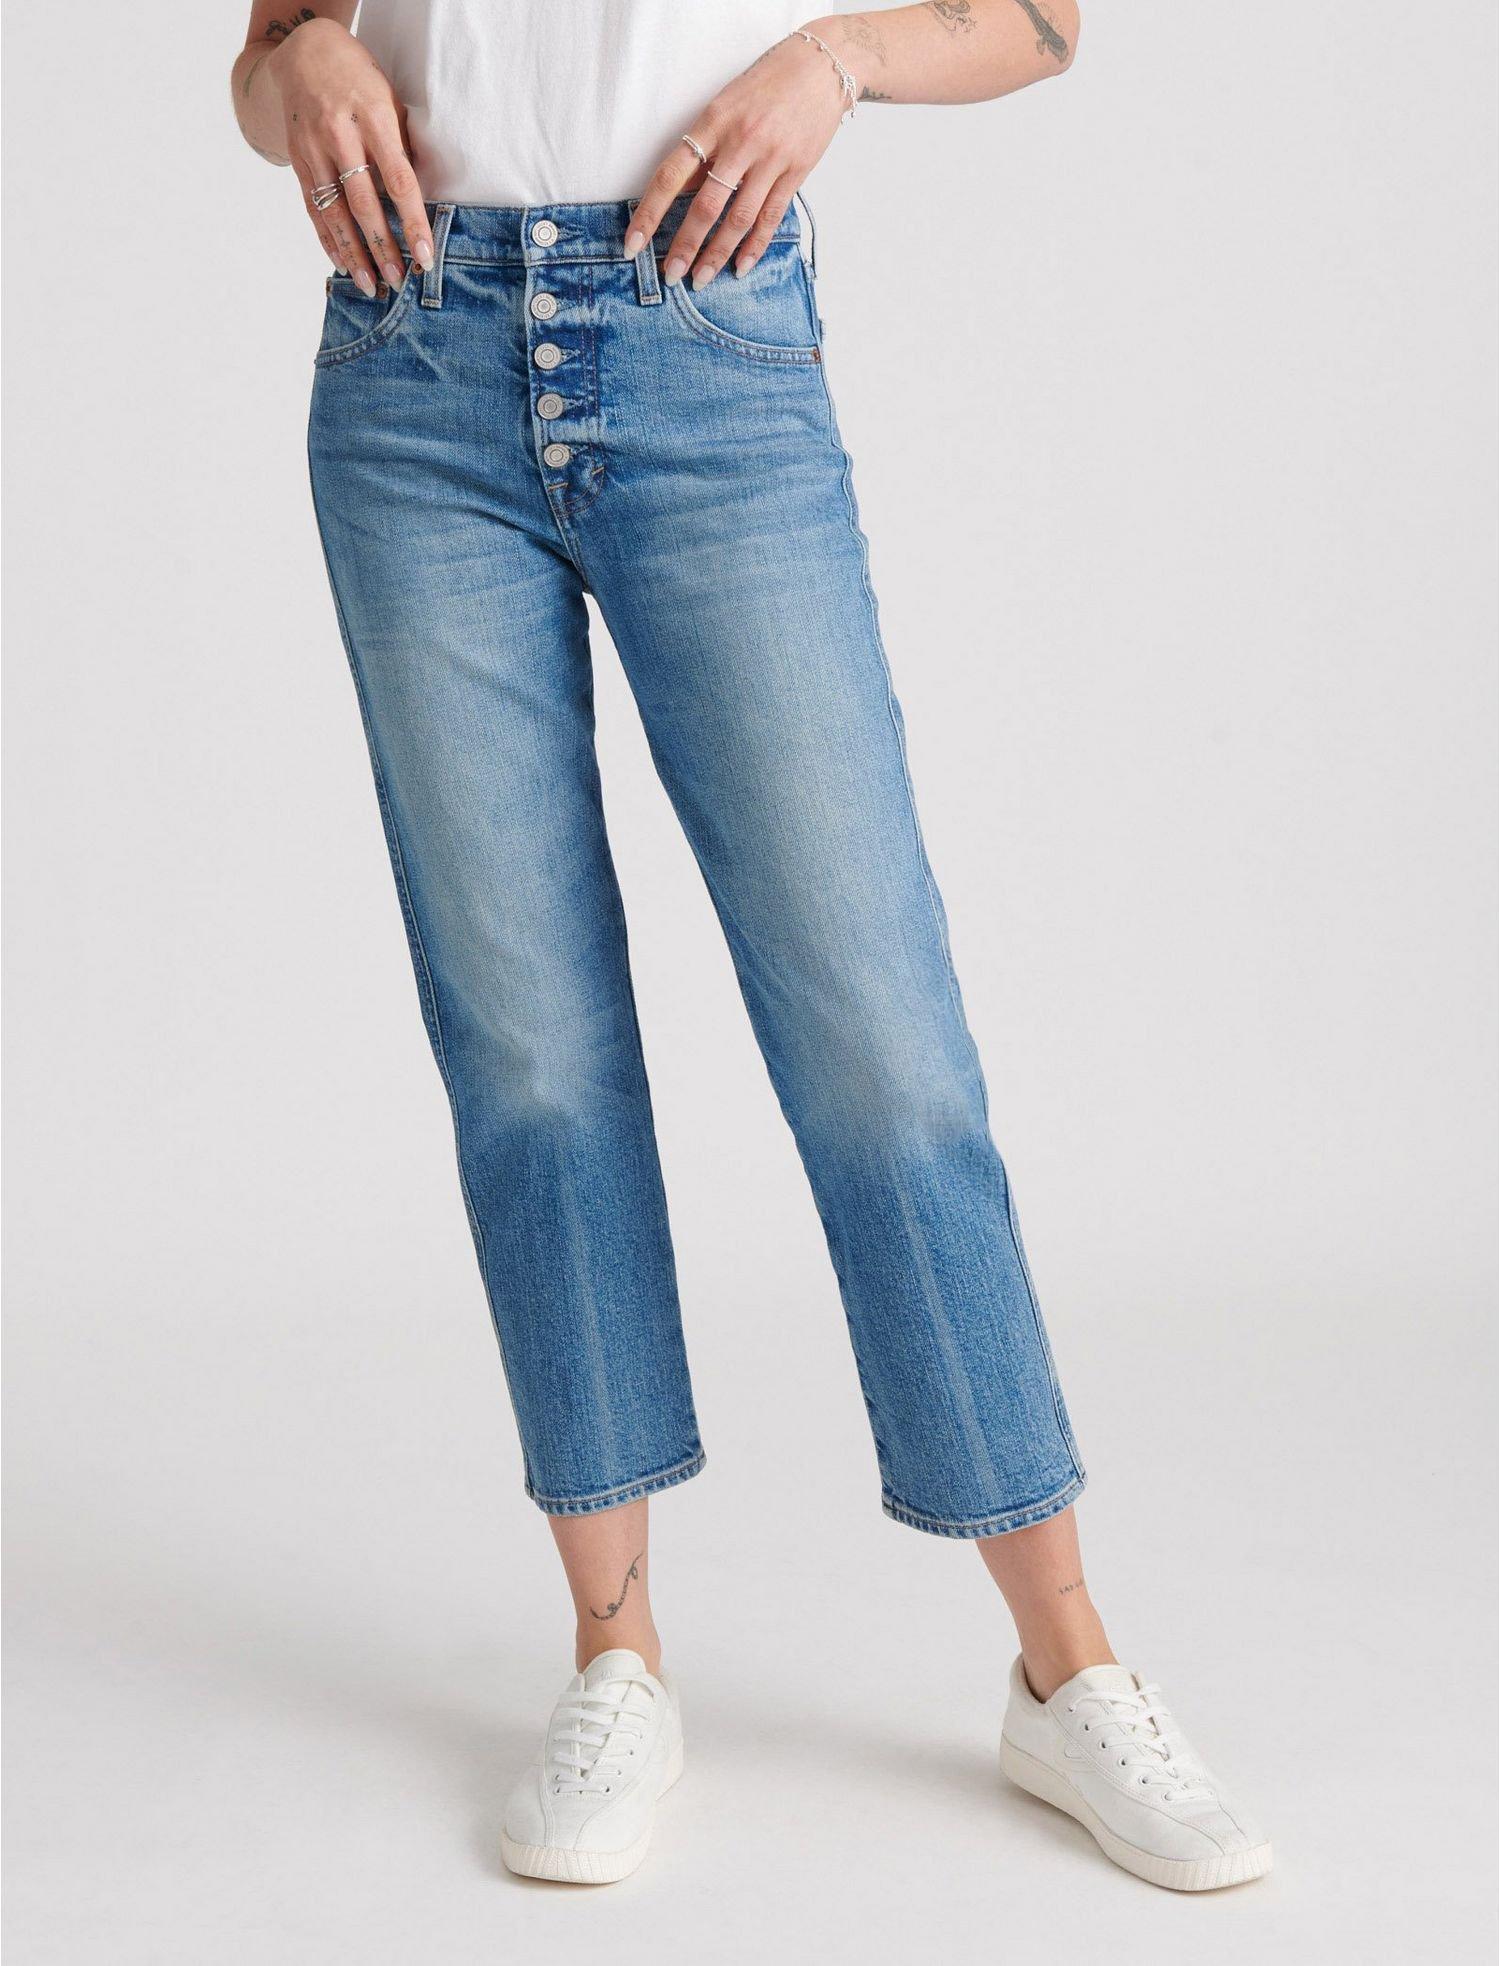 lucky brand jeans styles